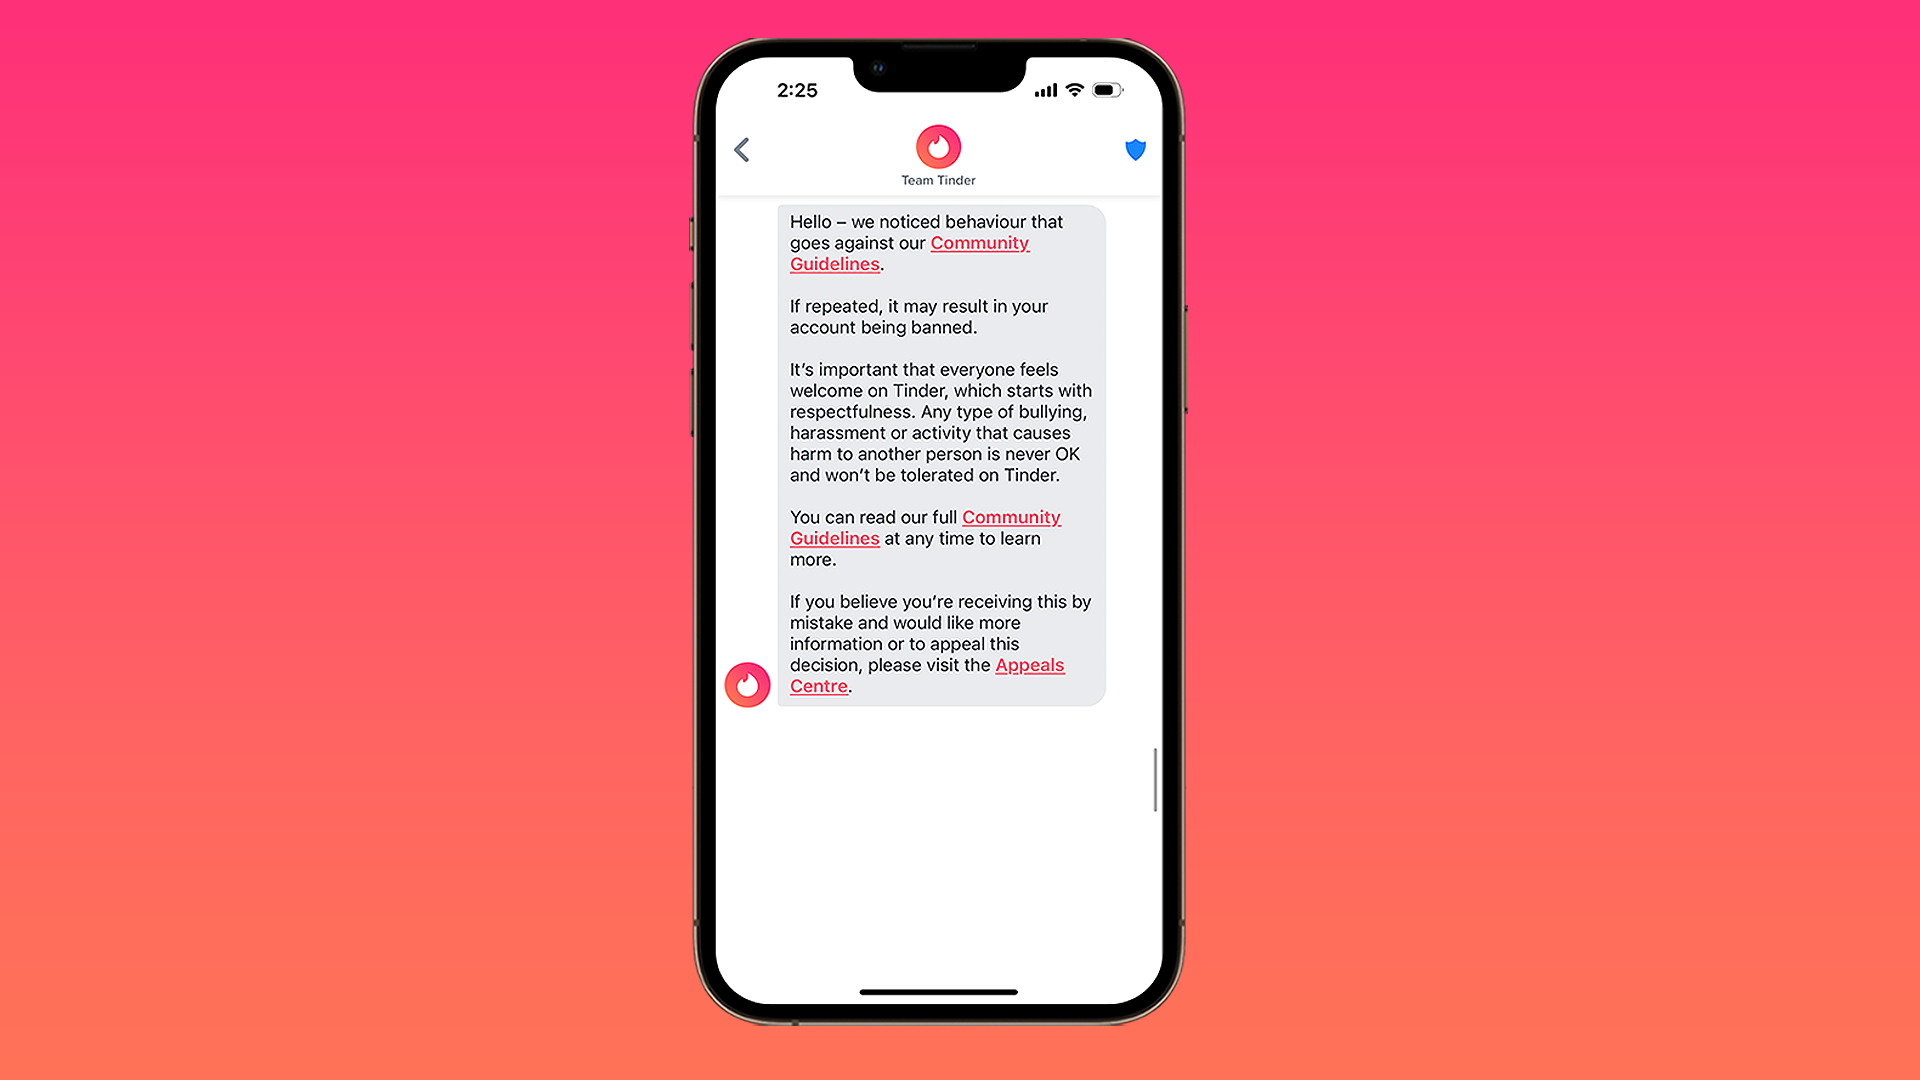 Tinder's new in-app warning in front of pink and orange gradient background.